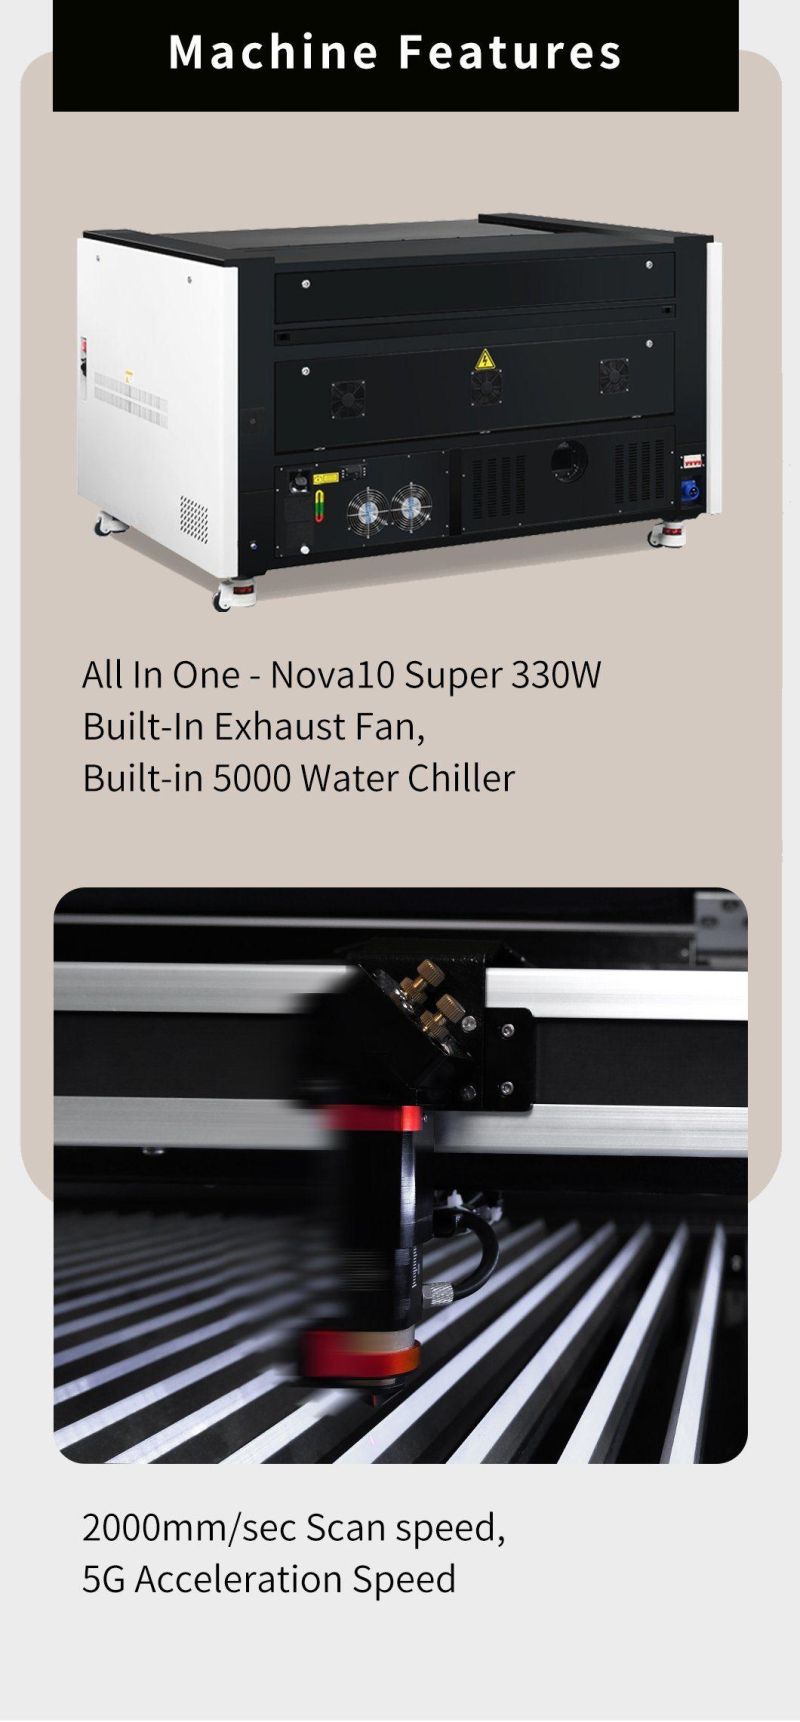 Aeon 80W 100W RF30W/60W 1070 1490 1690 Vector Engraving Semi-Automatic Laser Cutting Machine for Advertising/Leather/Printing and Packaging/Craft/Wood Industry